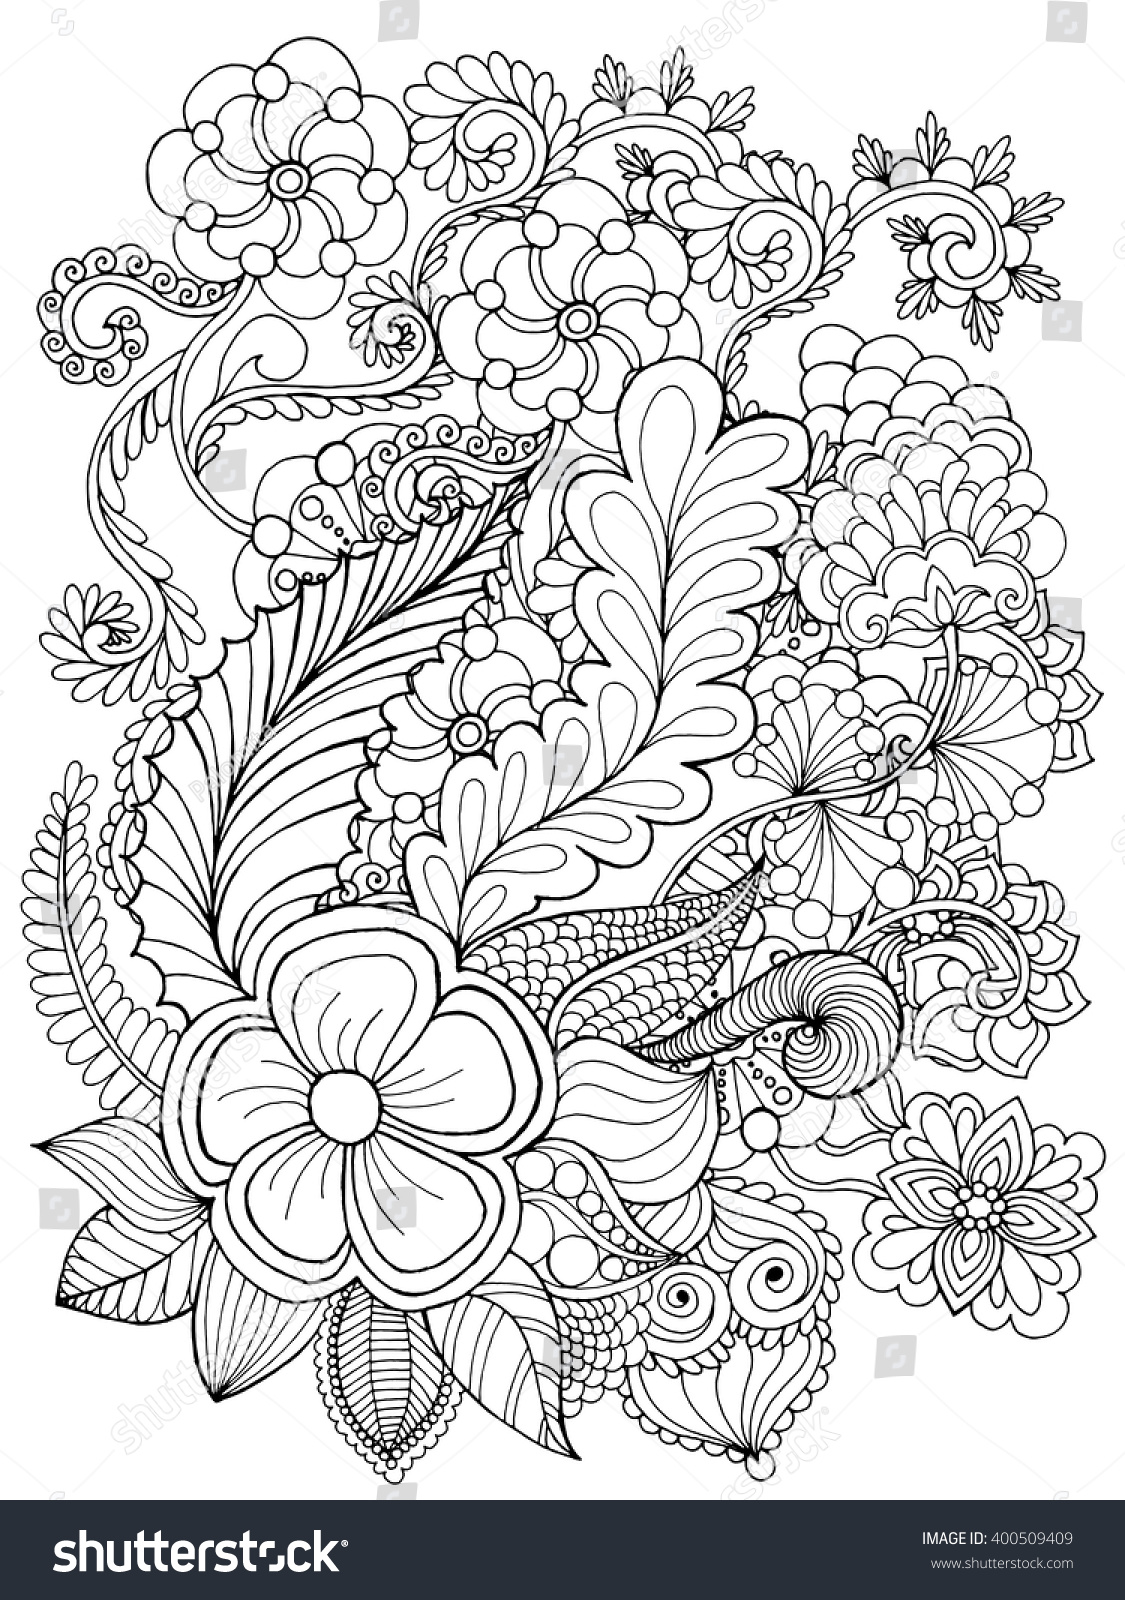 stock-vector-fantasy-flowers-coloring-page-hand-drawn-doodle-floral-patterned-vector-illustration-african-400509409